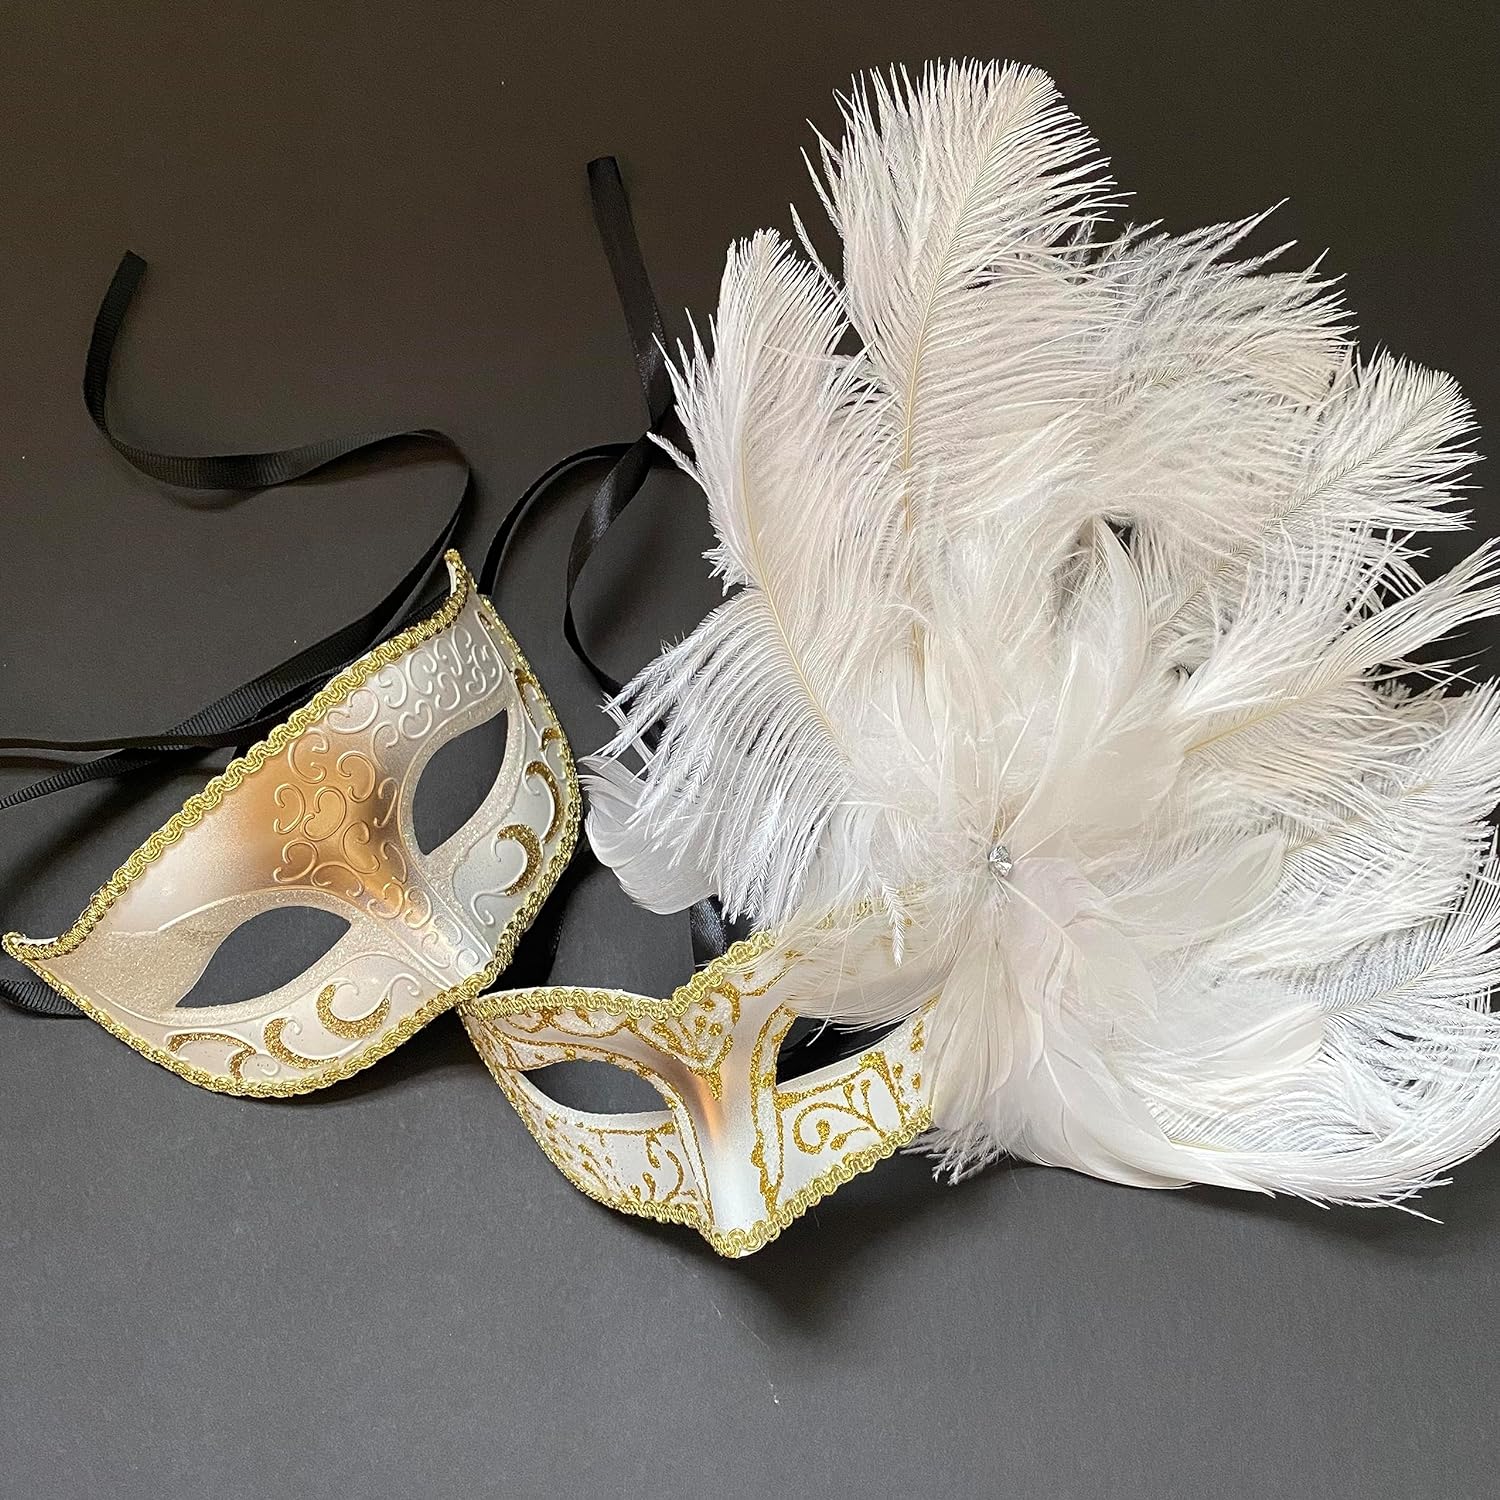 Mardi Gras Masquerade Mask Pair Cosplay Prom Dance Birthday Party Wear or Cake Topper Deco